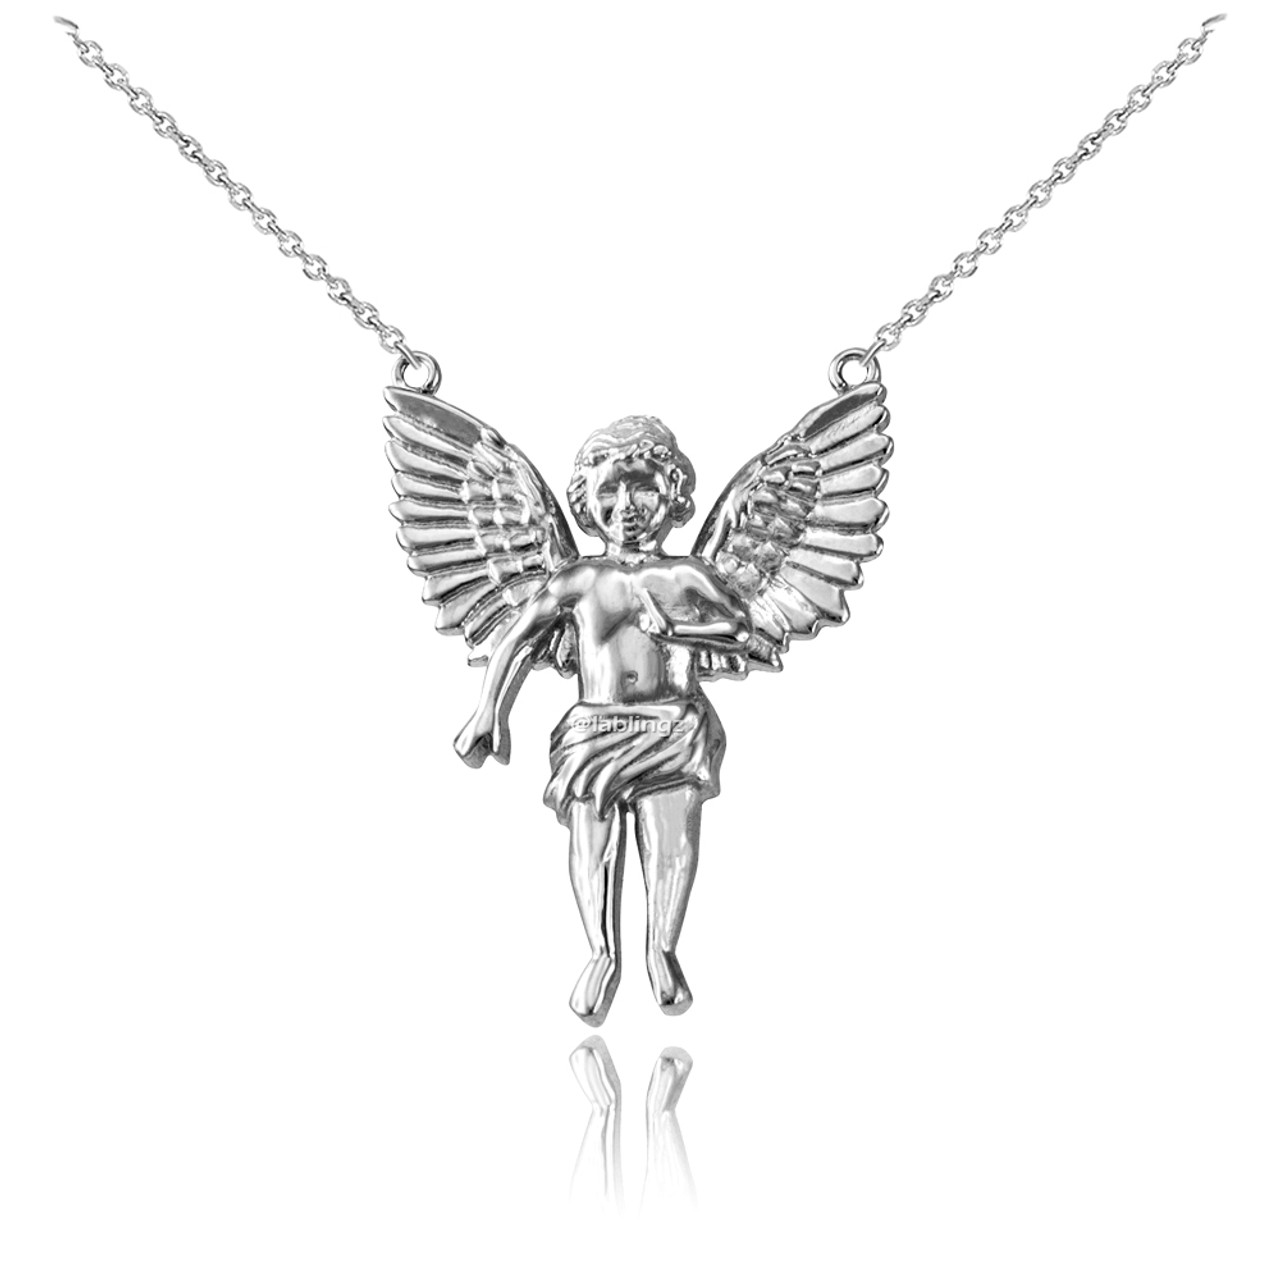 Silver Guardian Angel Necklace Angel Pendant Necklace Angels Christmas Angel  on Mercari | Handmade jewelry, Angel pendant necklace, Silver chain necklace